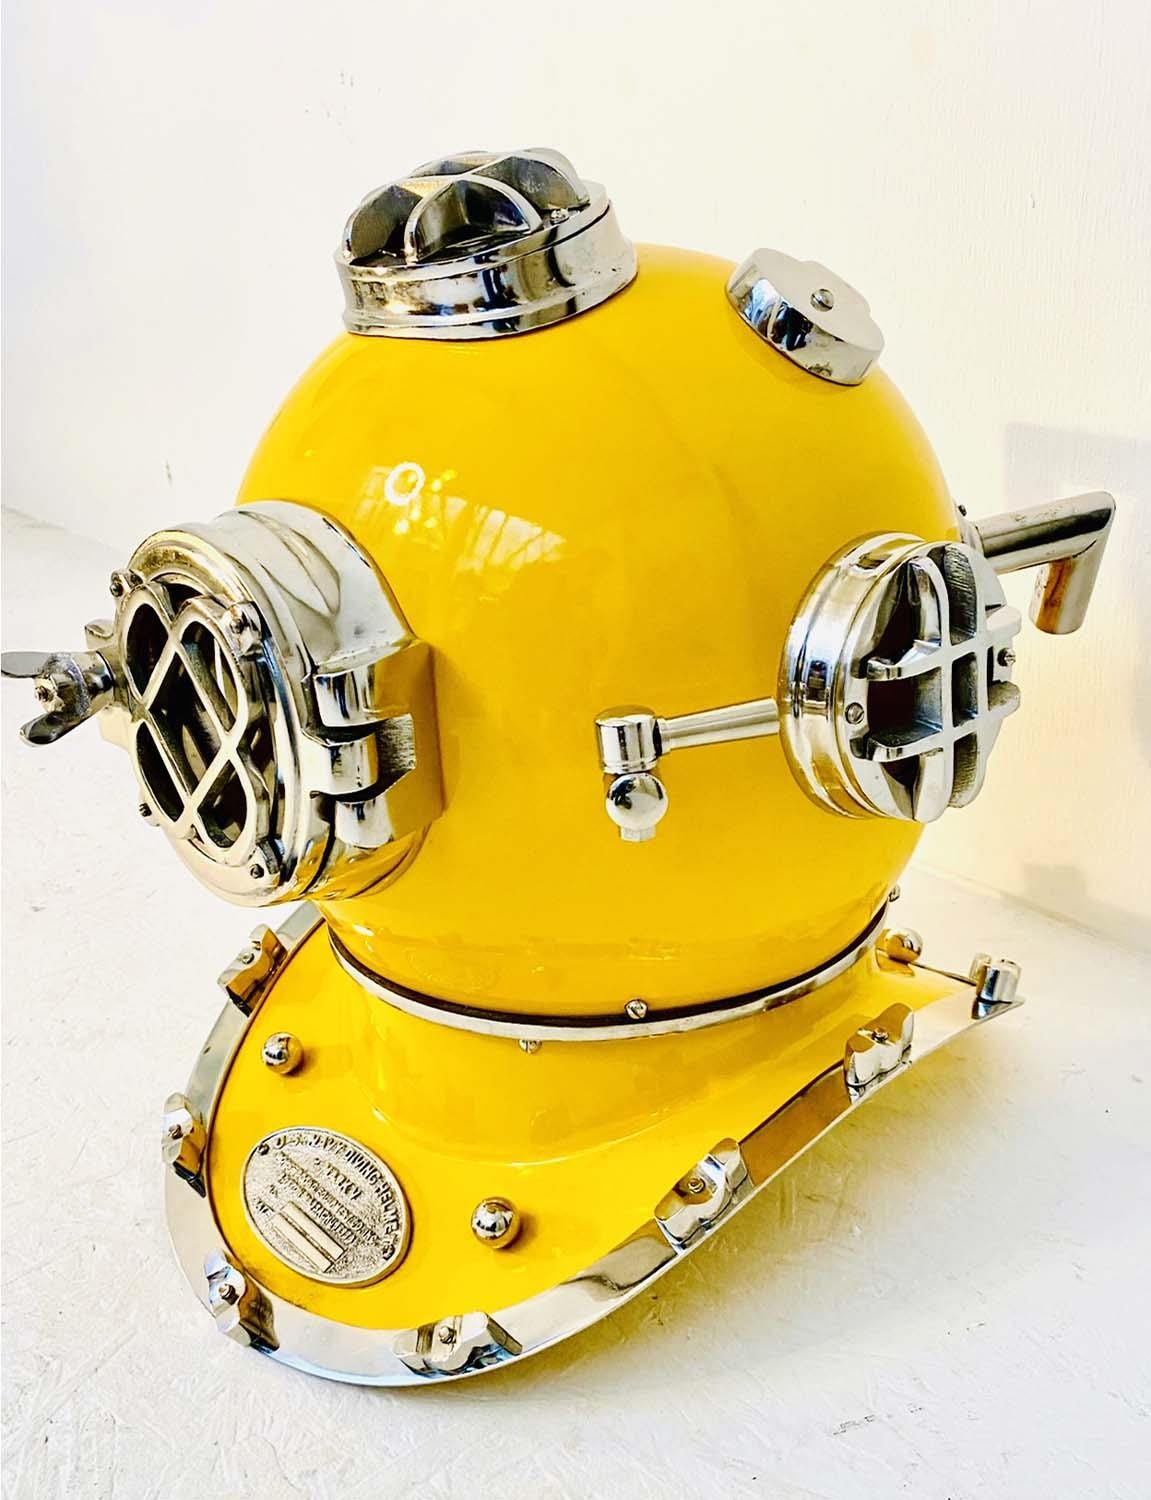 DECORATIVE DIVERS HELMET, reproduction, in a yellow finish, 40cm H. - Image 3 of 4